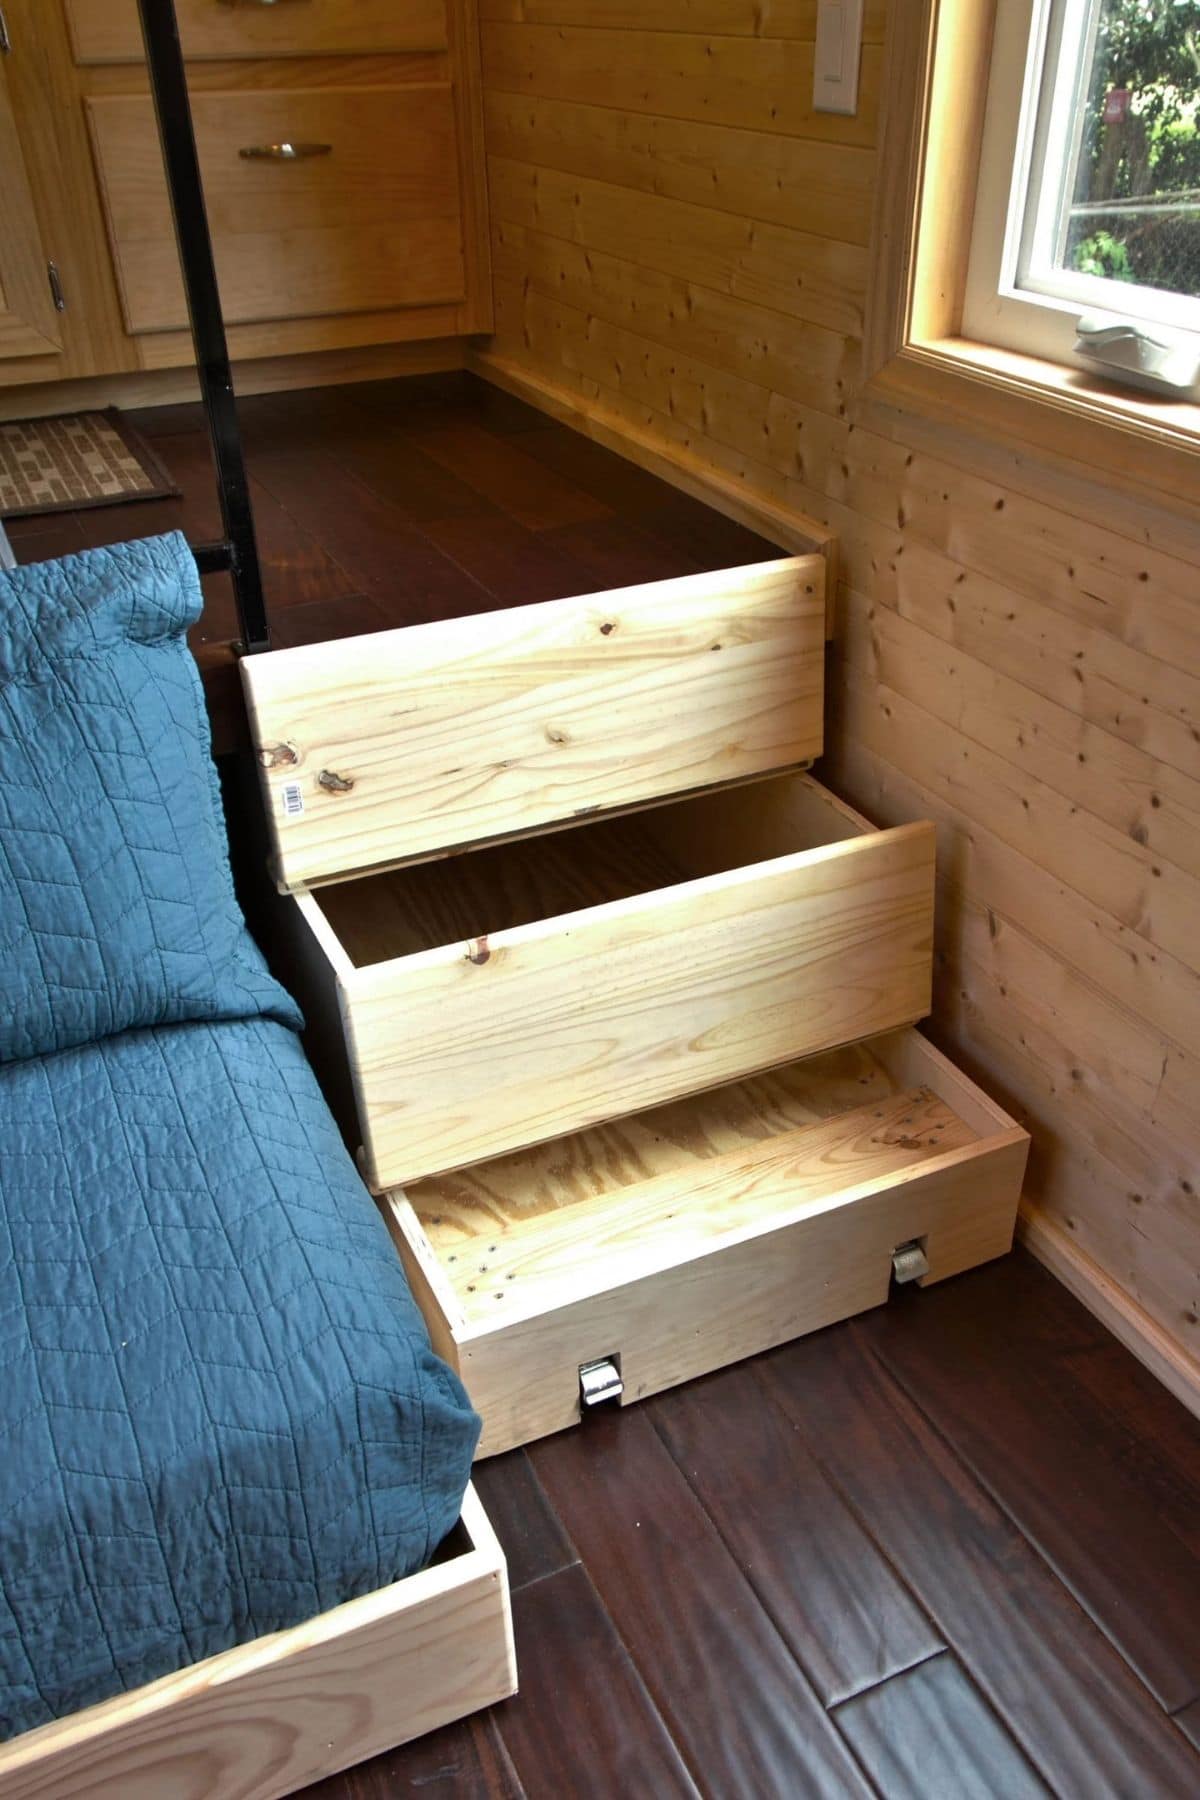 Drawers open on stairs by sofa